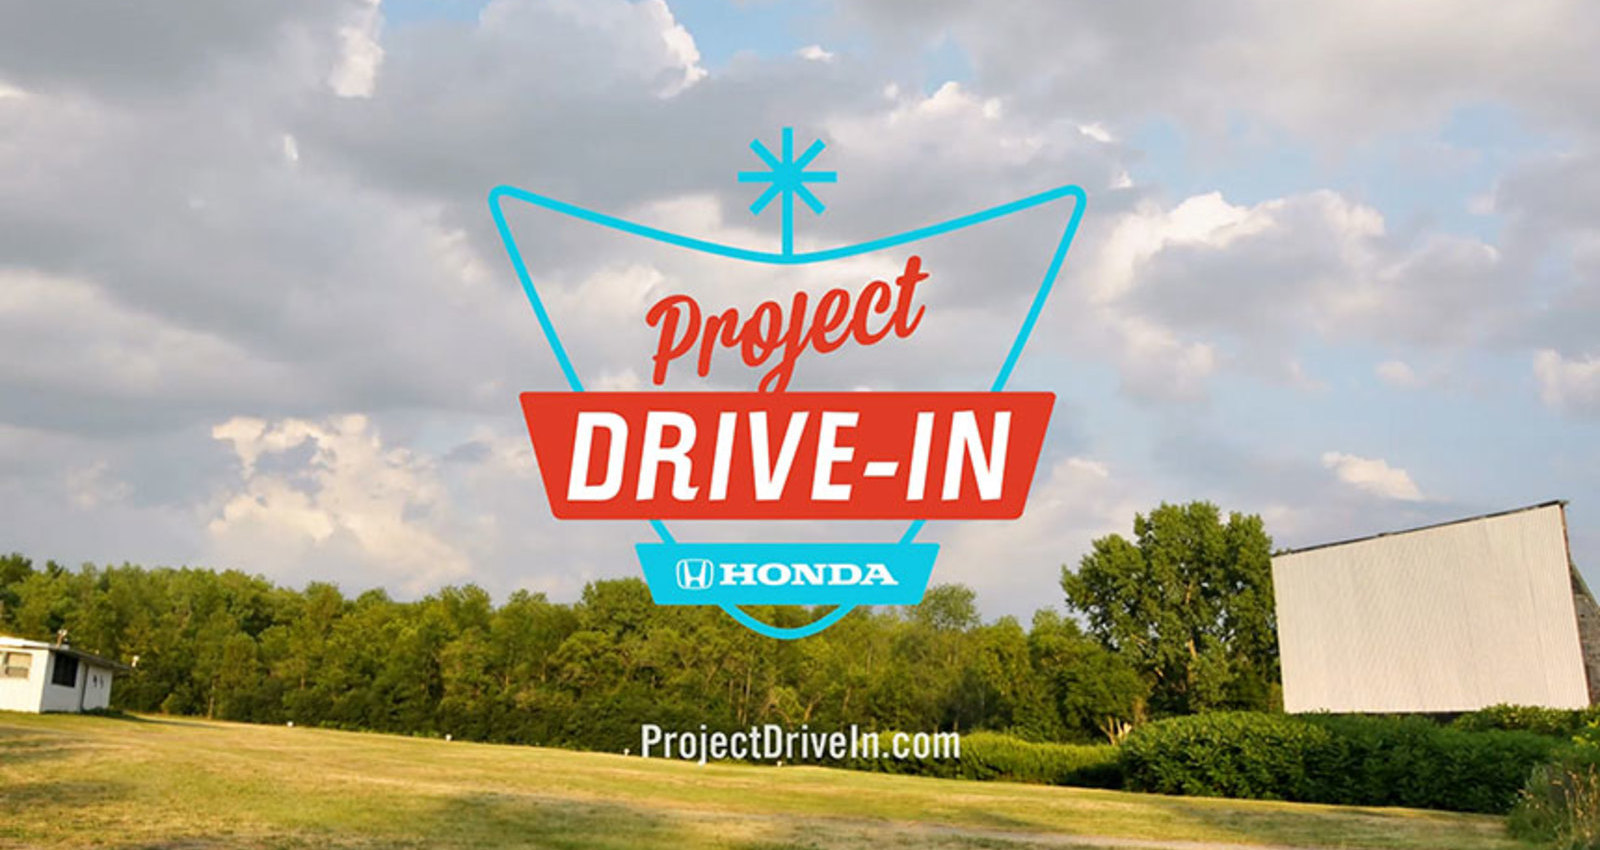 Project Drive-in